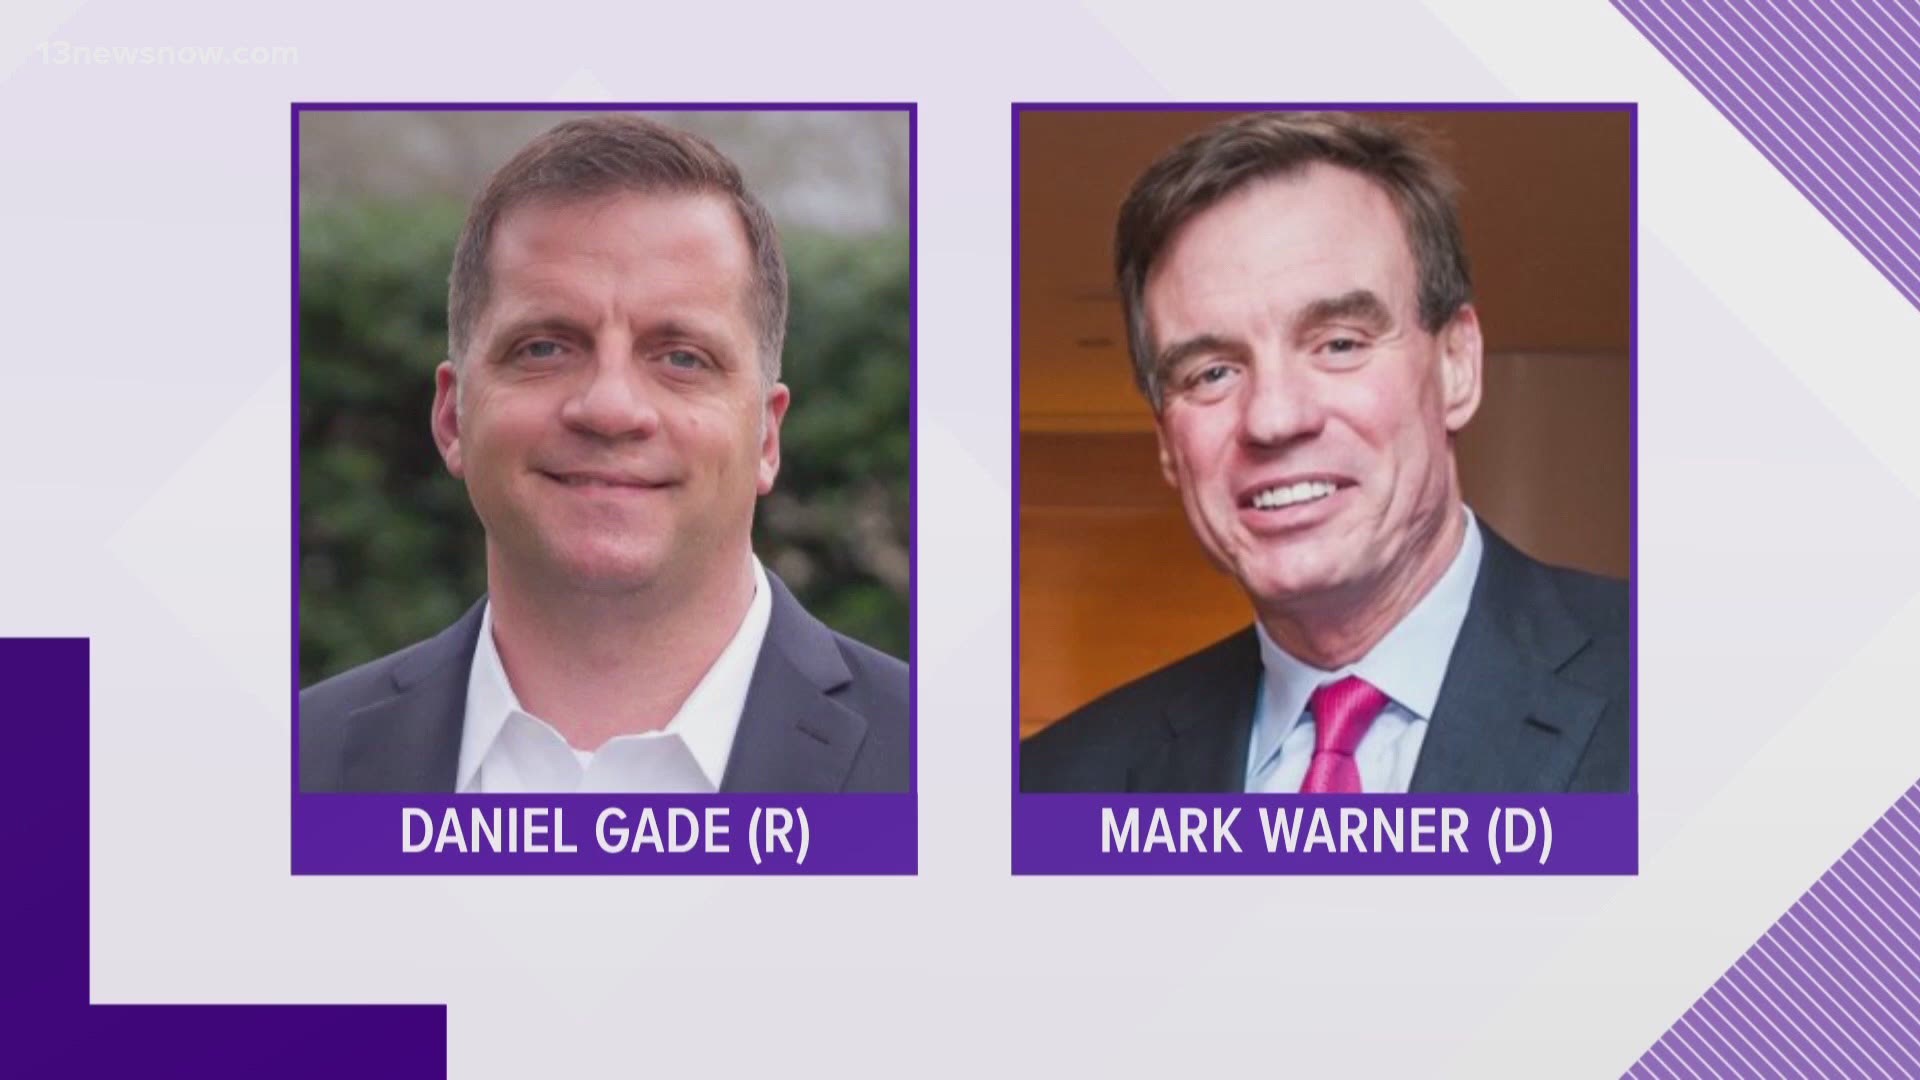 Gade got 67% of the vote in Virginia's June 23 primary, against two other Republican candidates for the Senate race.